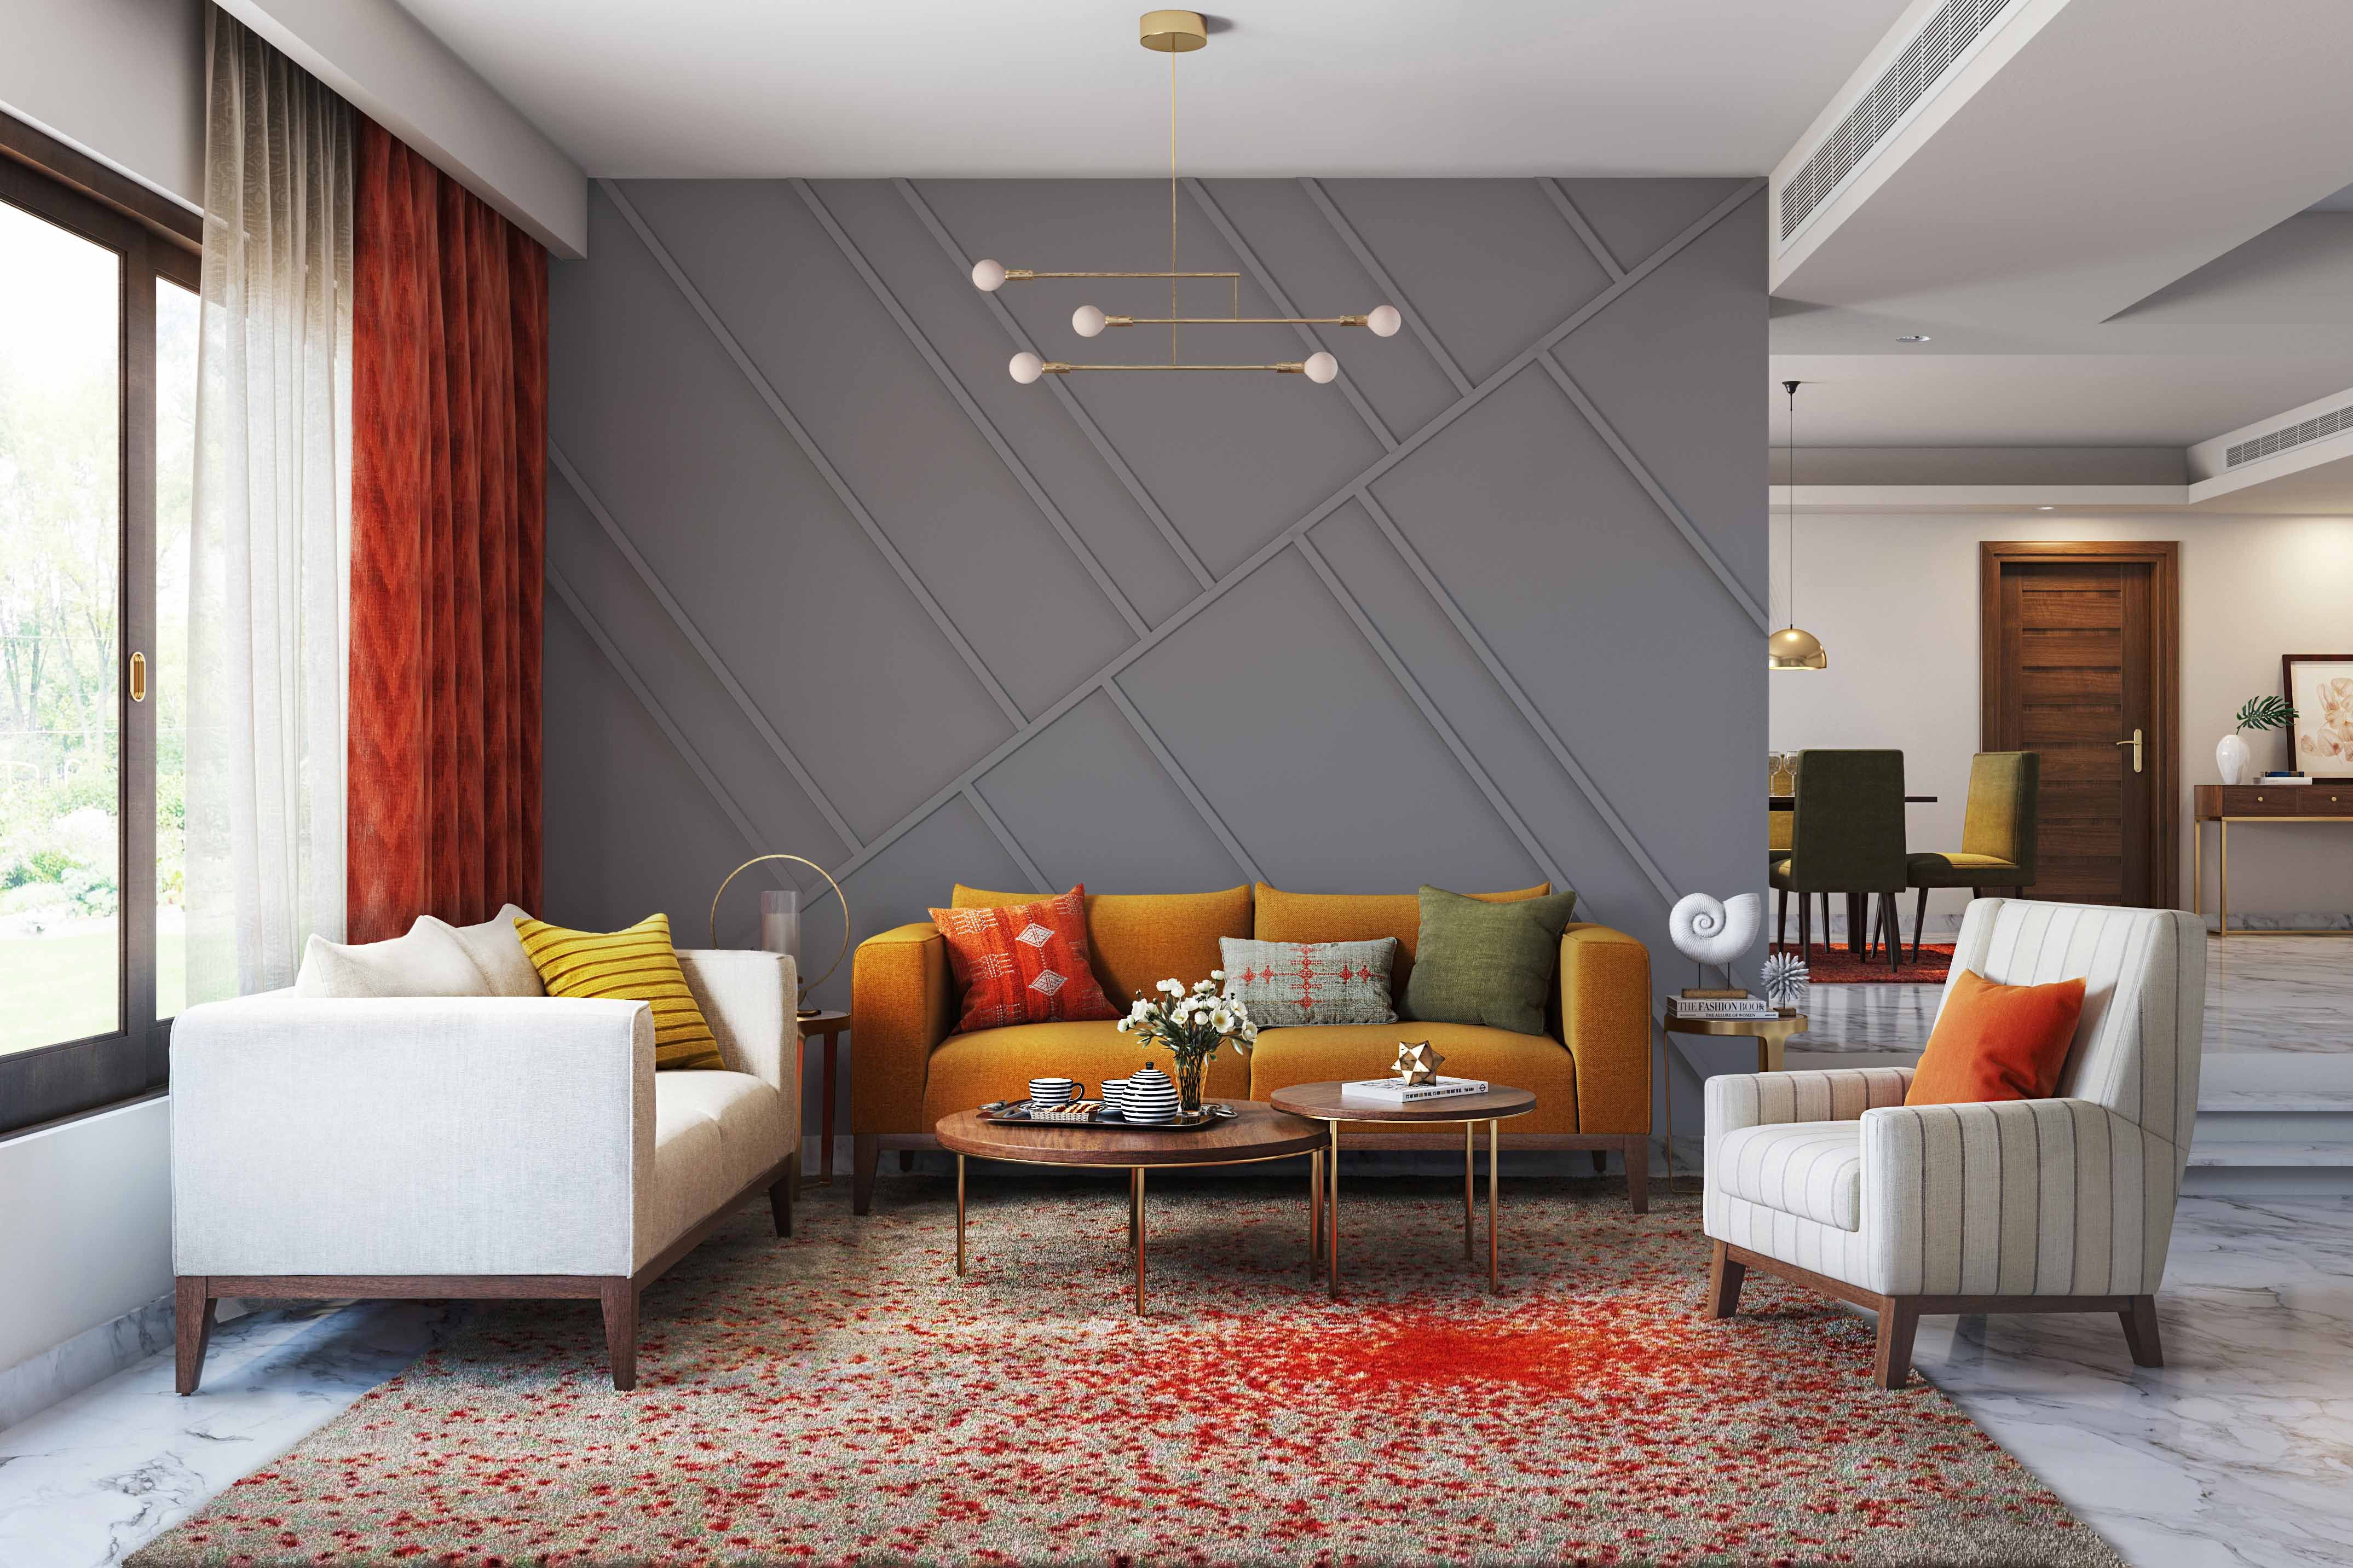 Modern Grey Living Room Wall Design With Geometric Panelling